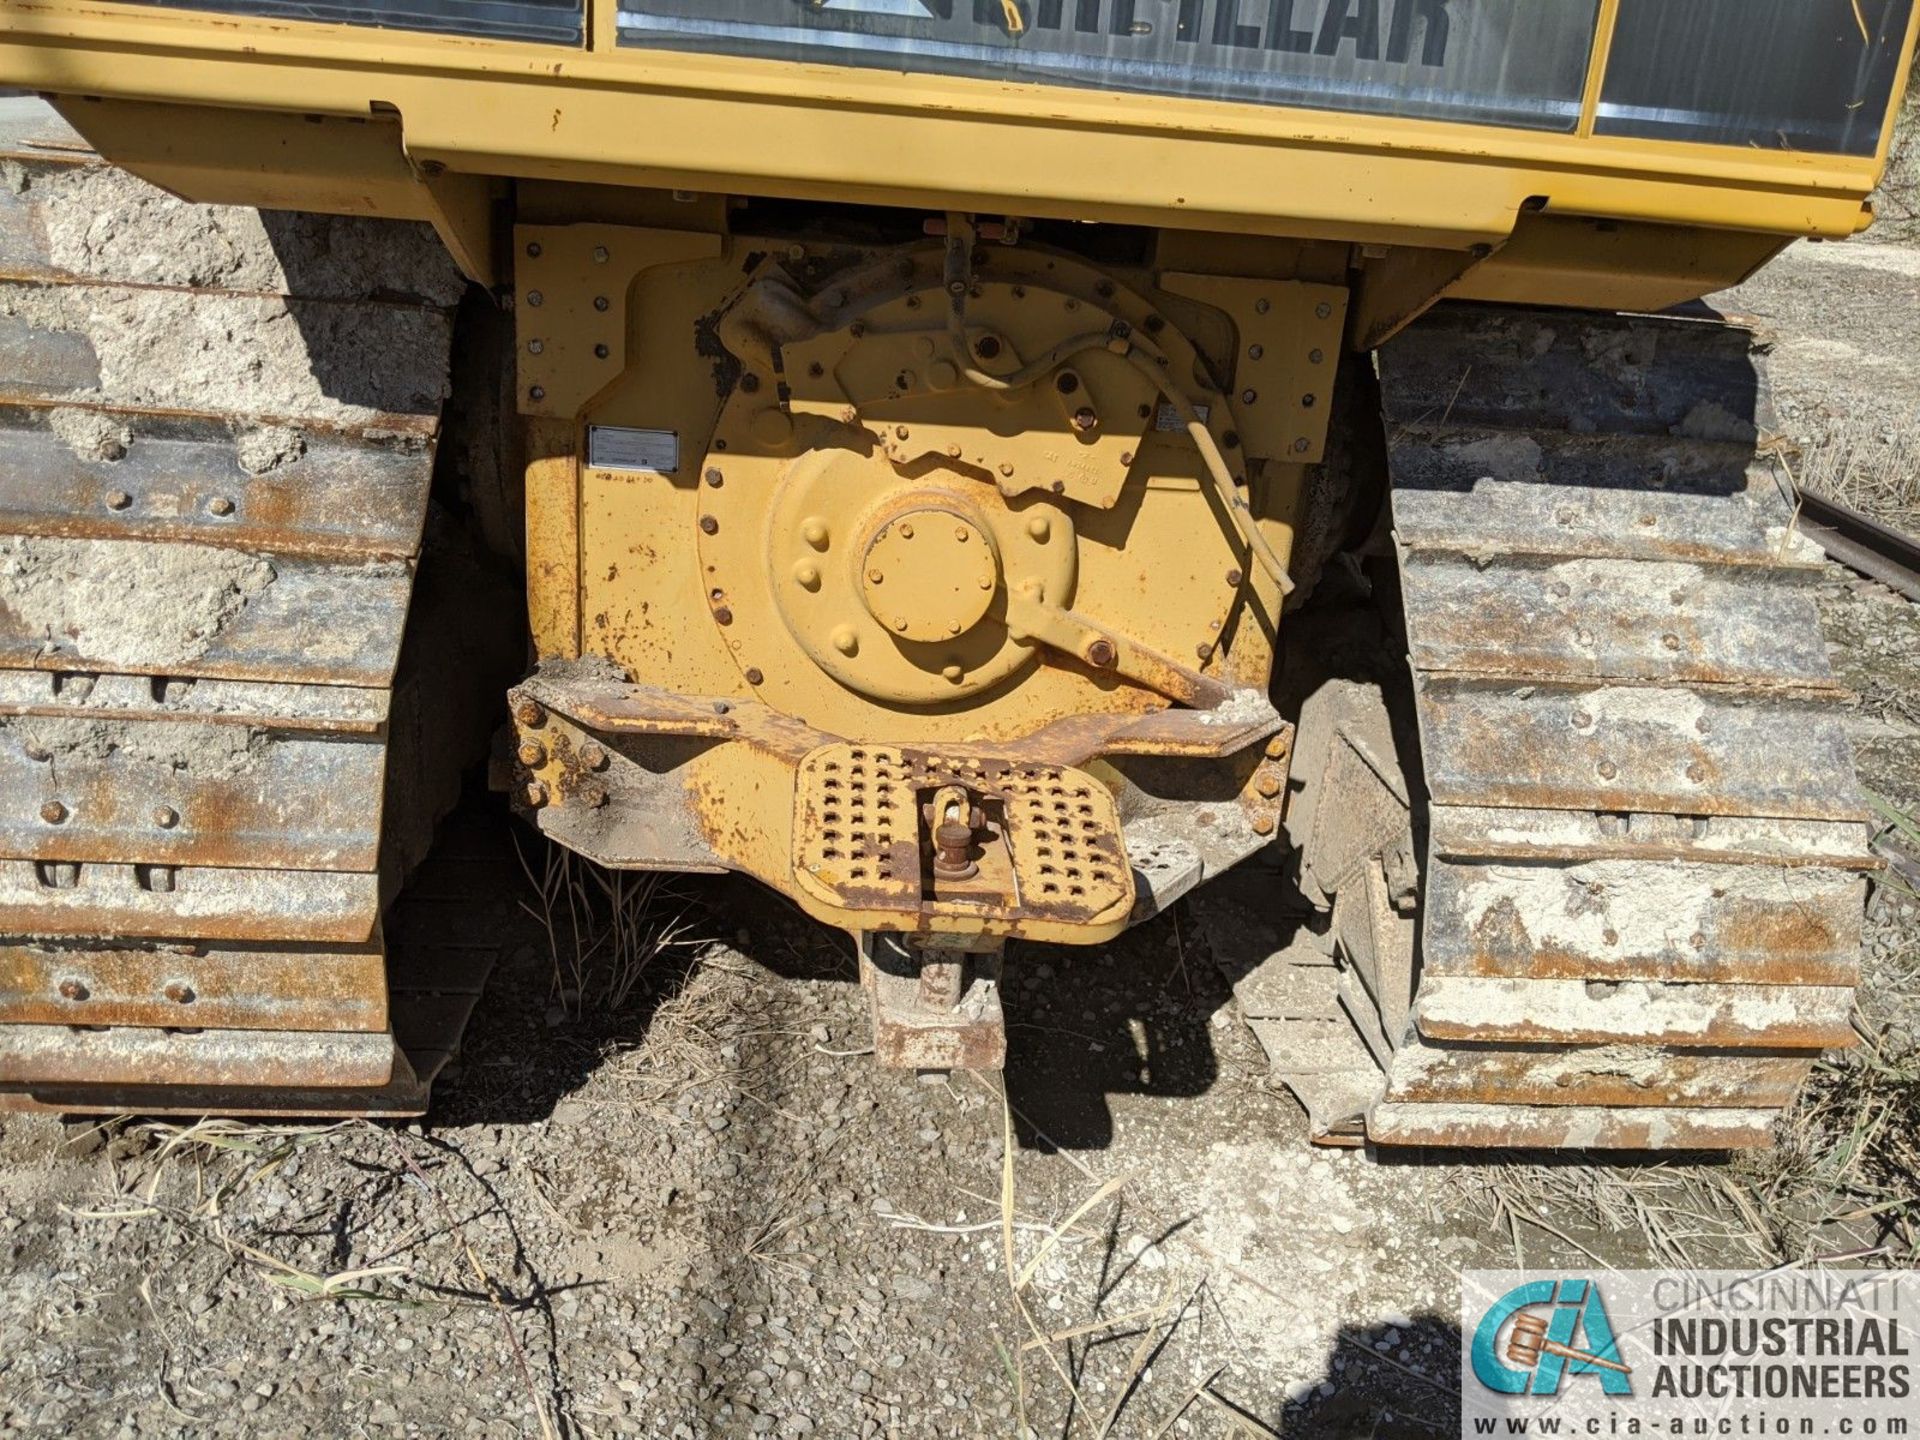 1993 CATERPILLAR MODEL D5H INCLINE TRACK CRAWLER DOZER; S/N 12Z48432, ENGINE NO. 3304, PRODUCT ID - Image 6 of 13